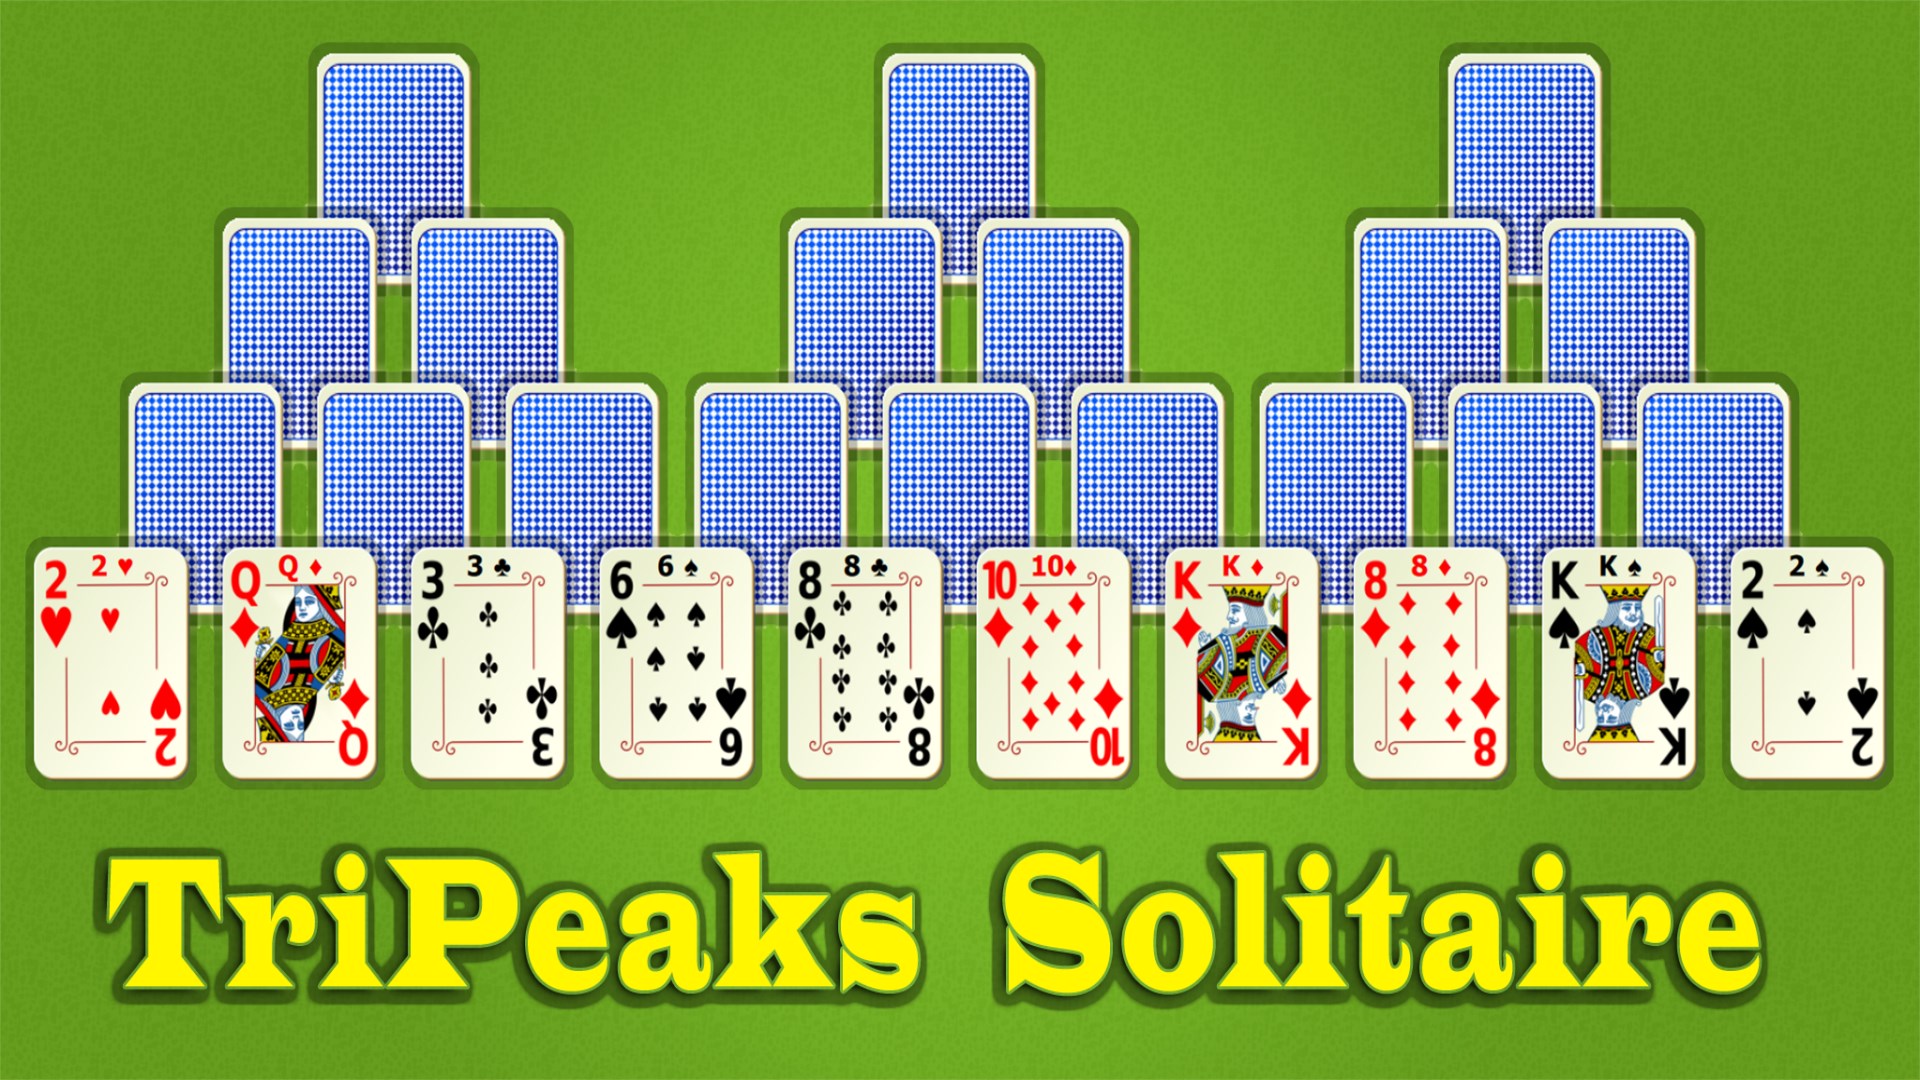 download solitaire story tripeaks